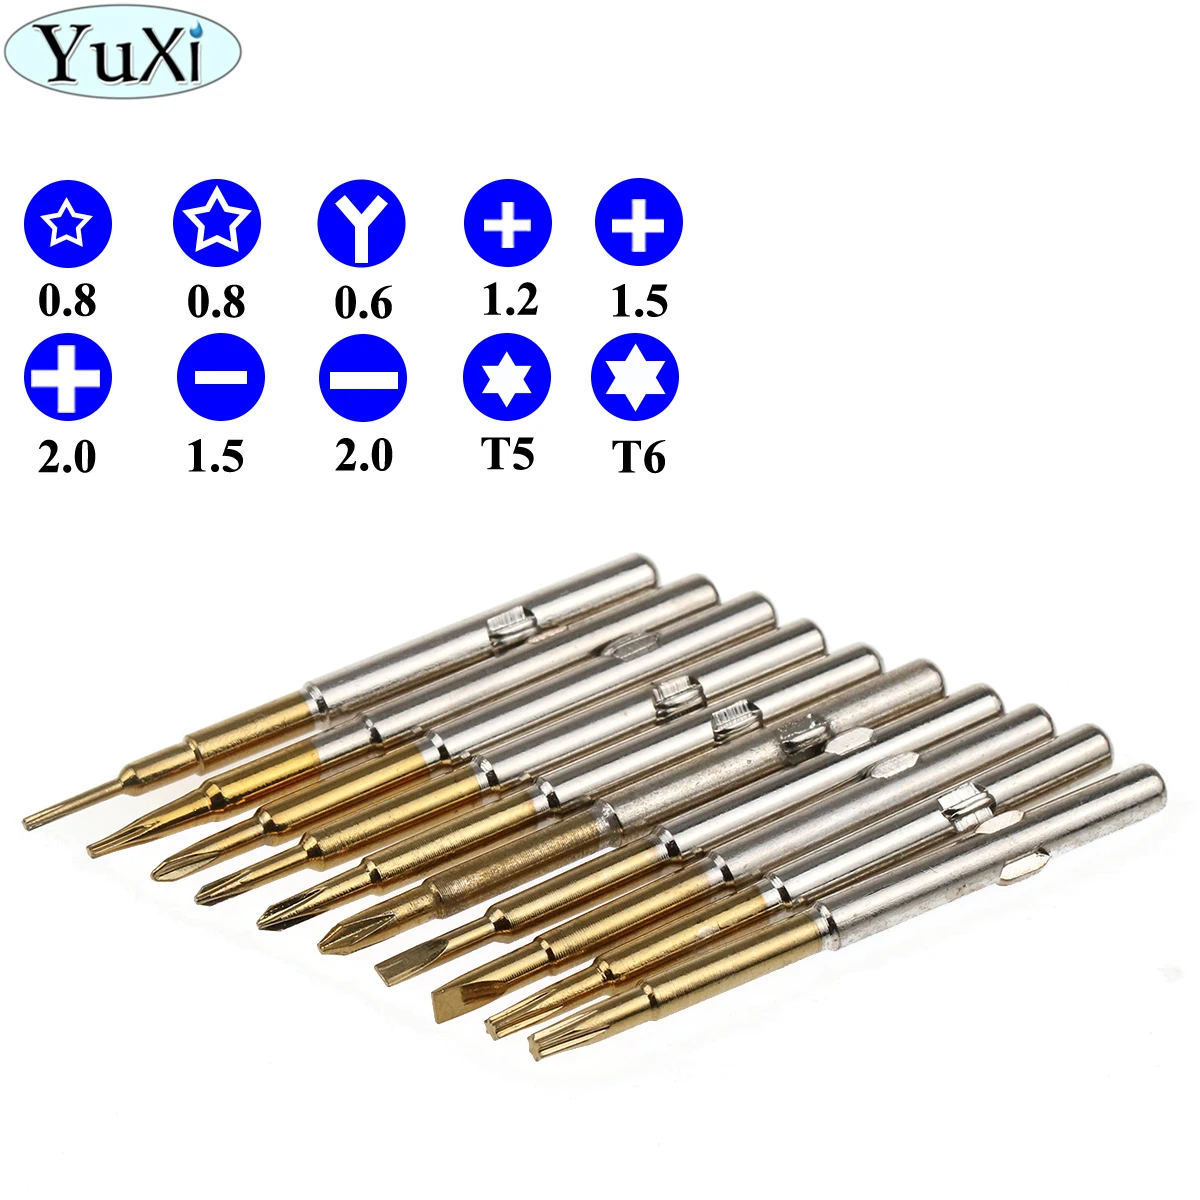 

YuXi Screwdriver Set Screwdriver Repair Tool Set For iPhone Cellphone Tablet PC Hand tools Portable replacement screwdriver head